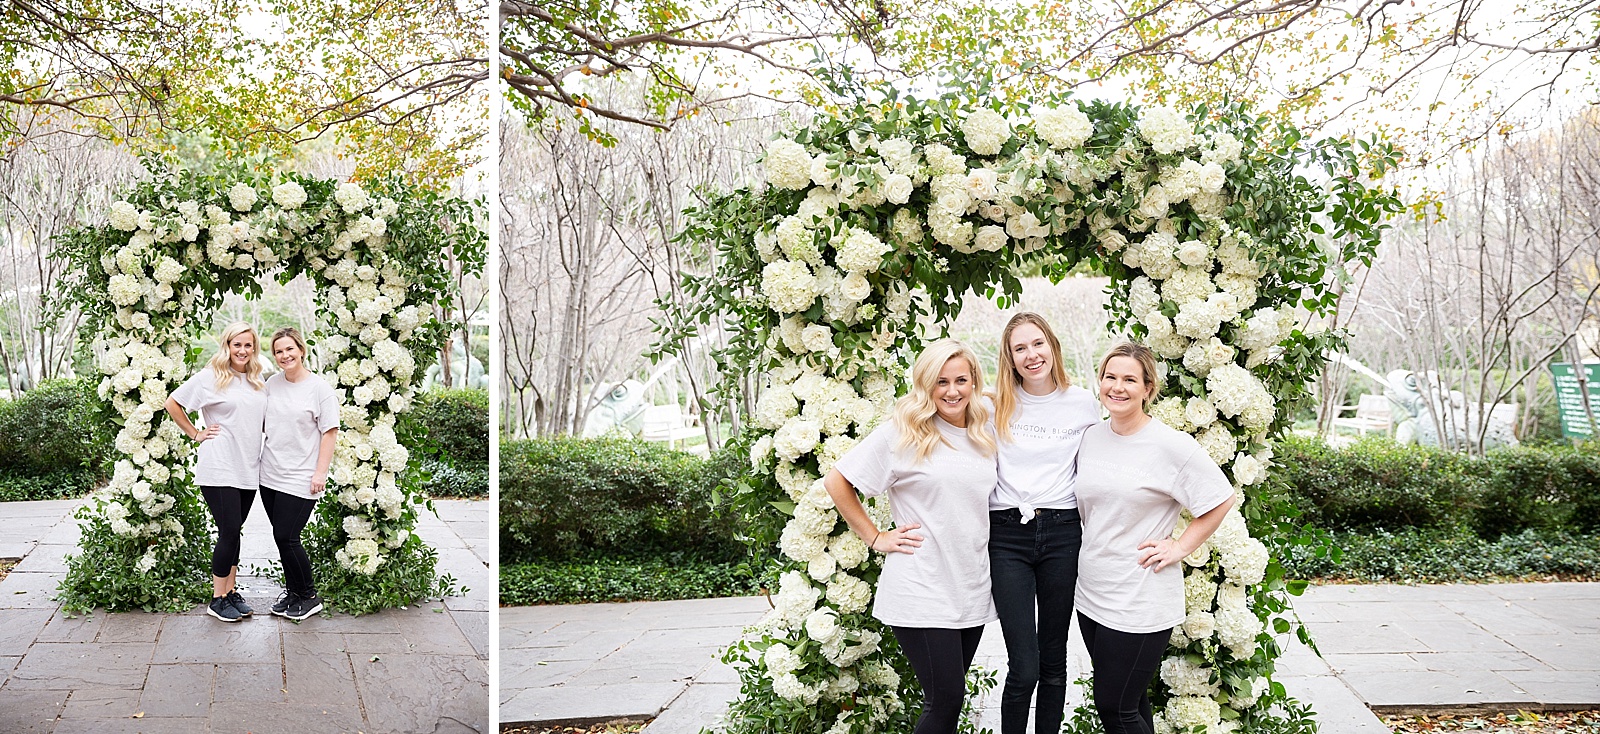 Blushington Blooms team preps floral arch during shoot at W Hotel Downtown Dallas photographed by Randi Michelle Photography